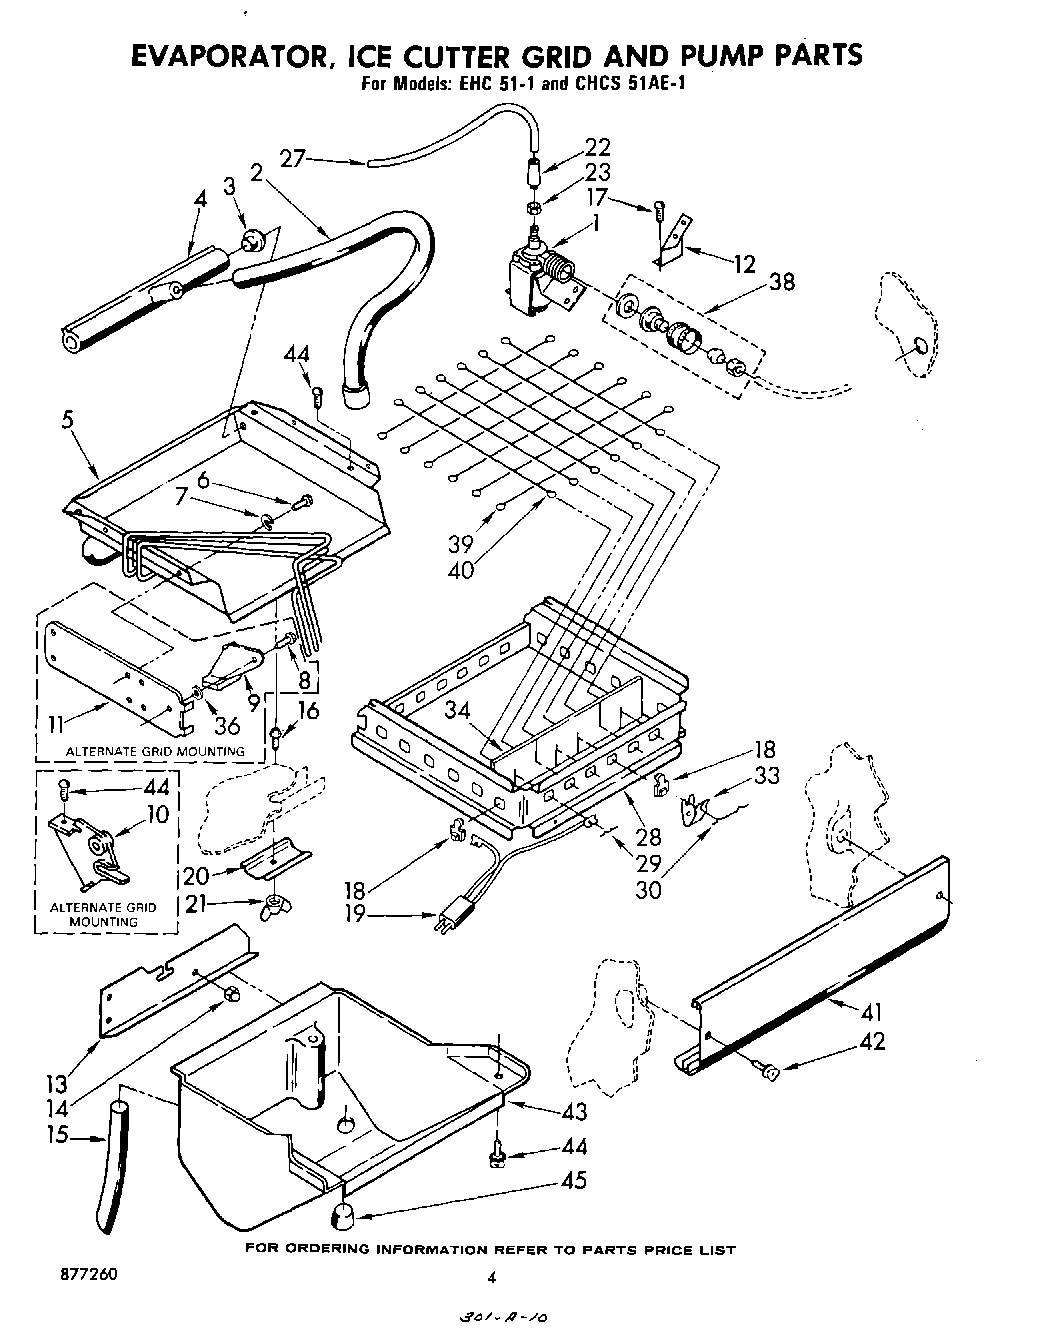 03 - EVAPORATOR, ICE CUTTER GRID AND PUMP